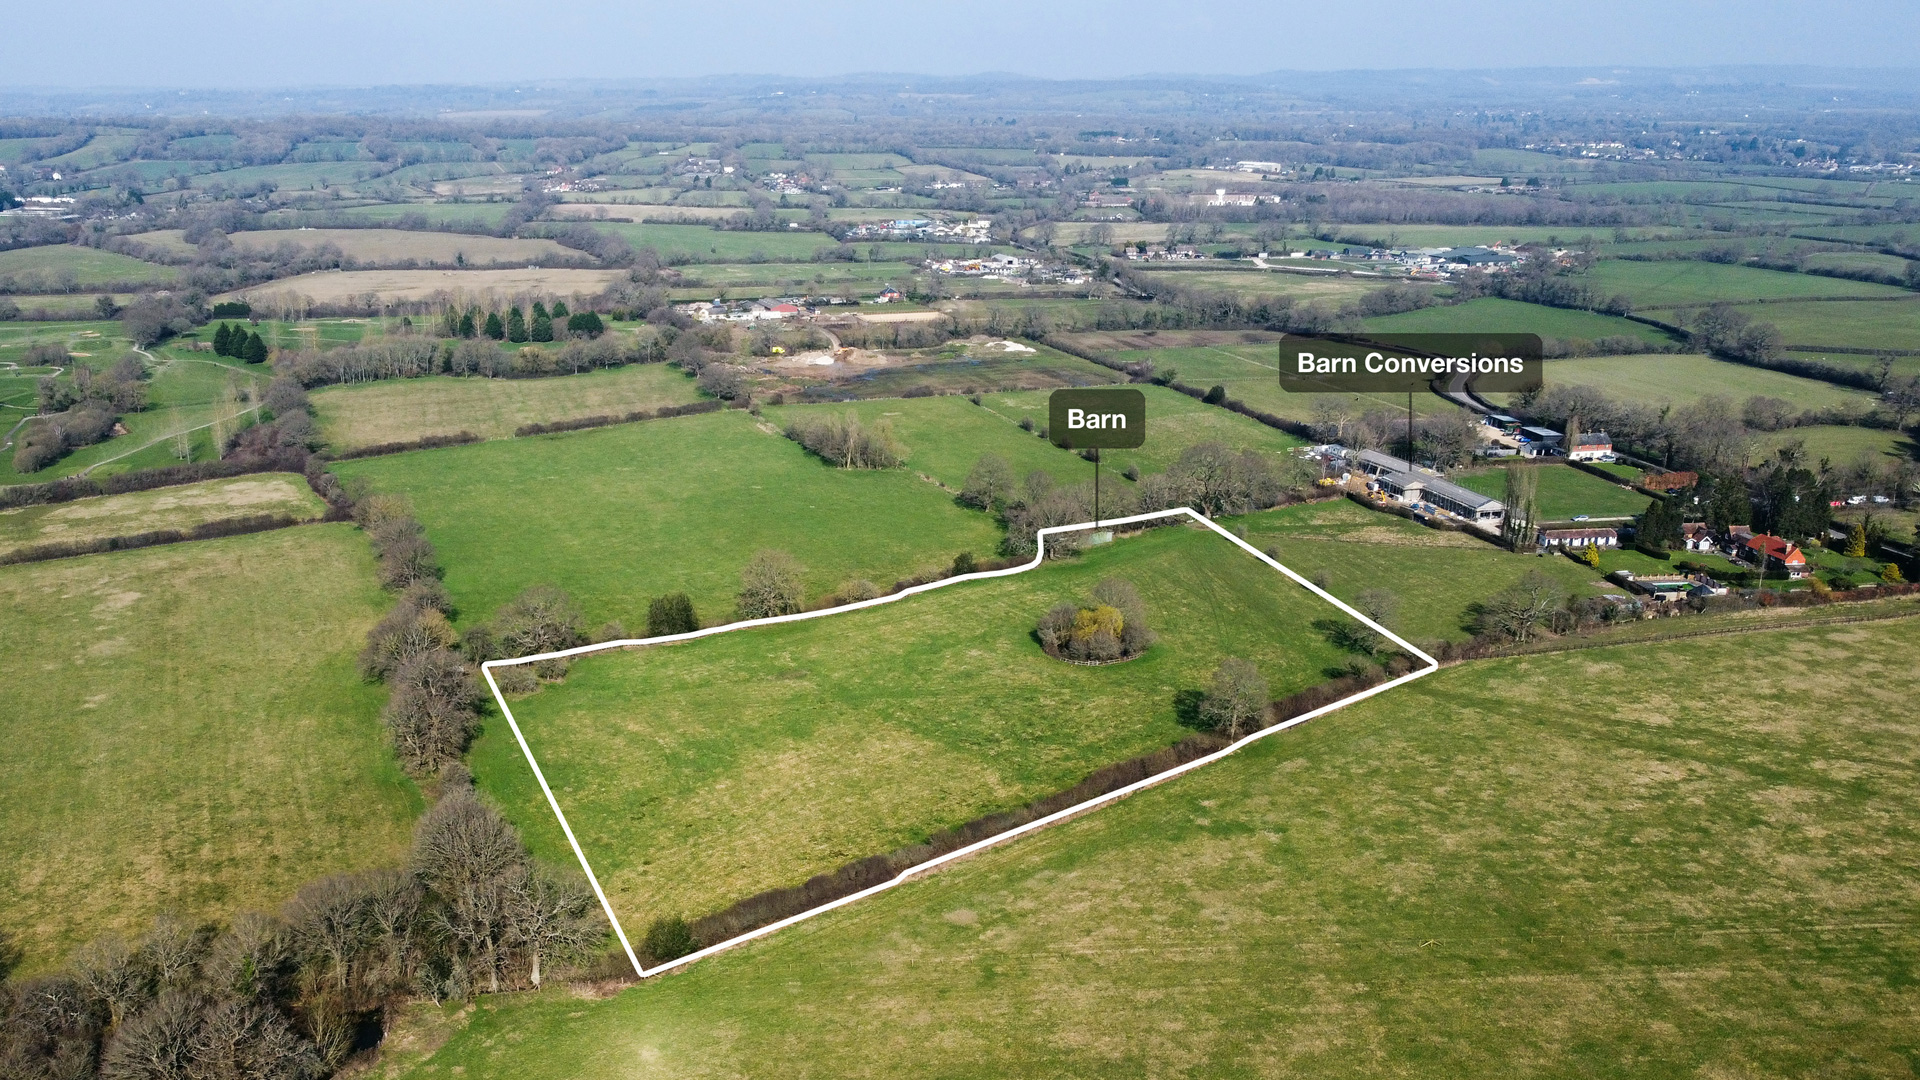 Branford Barn & land for sale in Newchapel, Lingfield drone photo